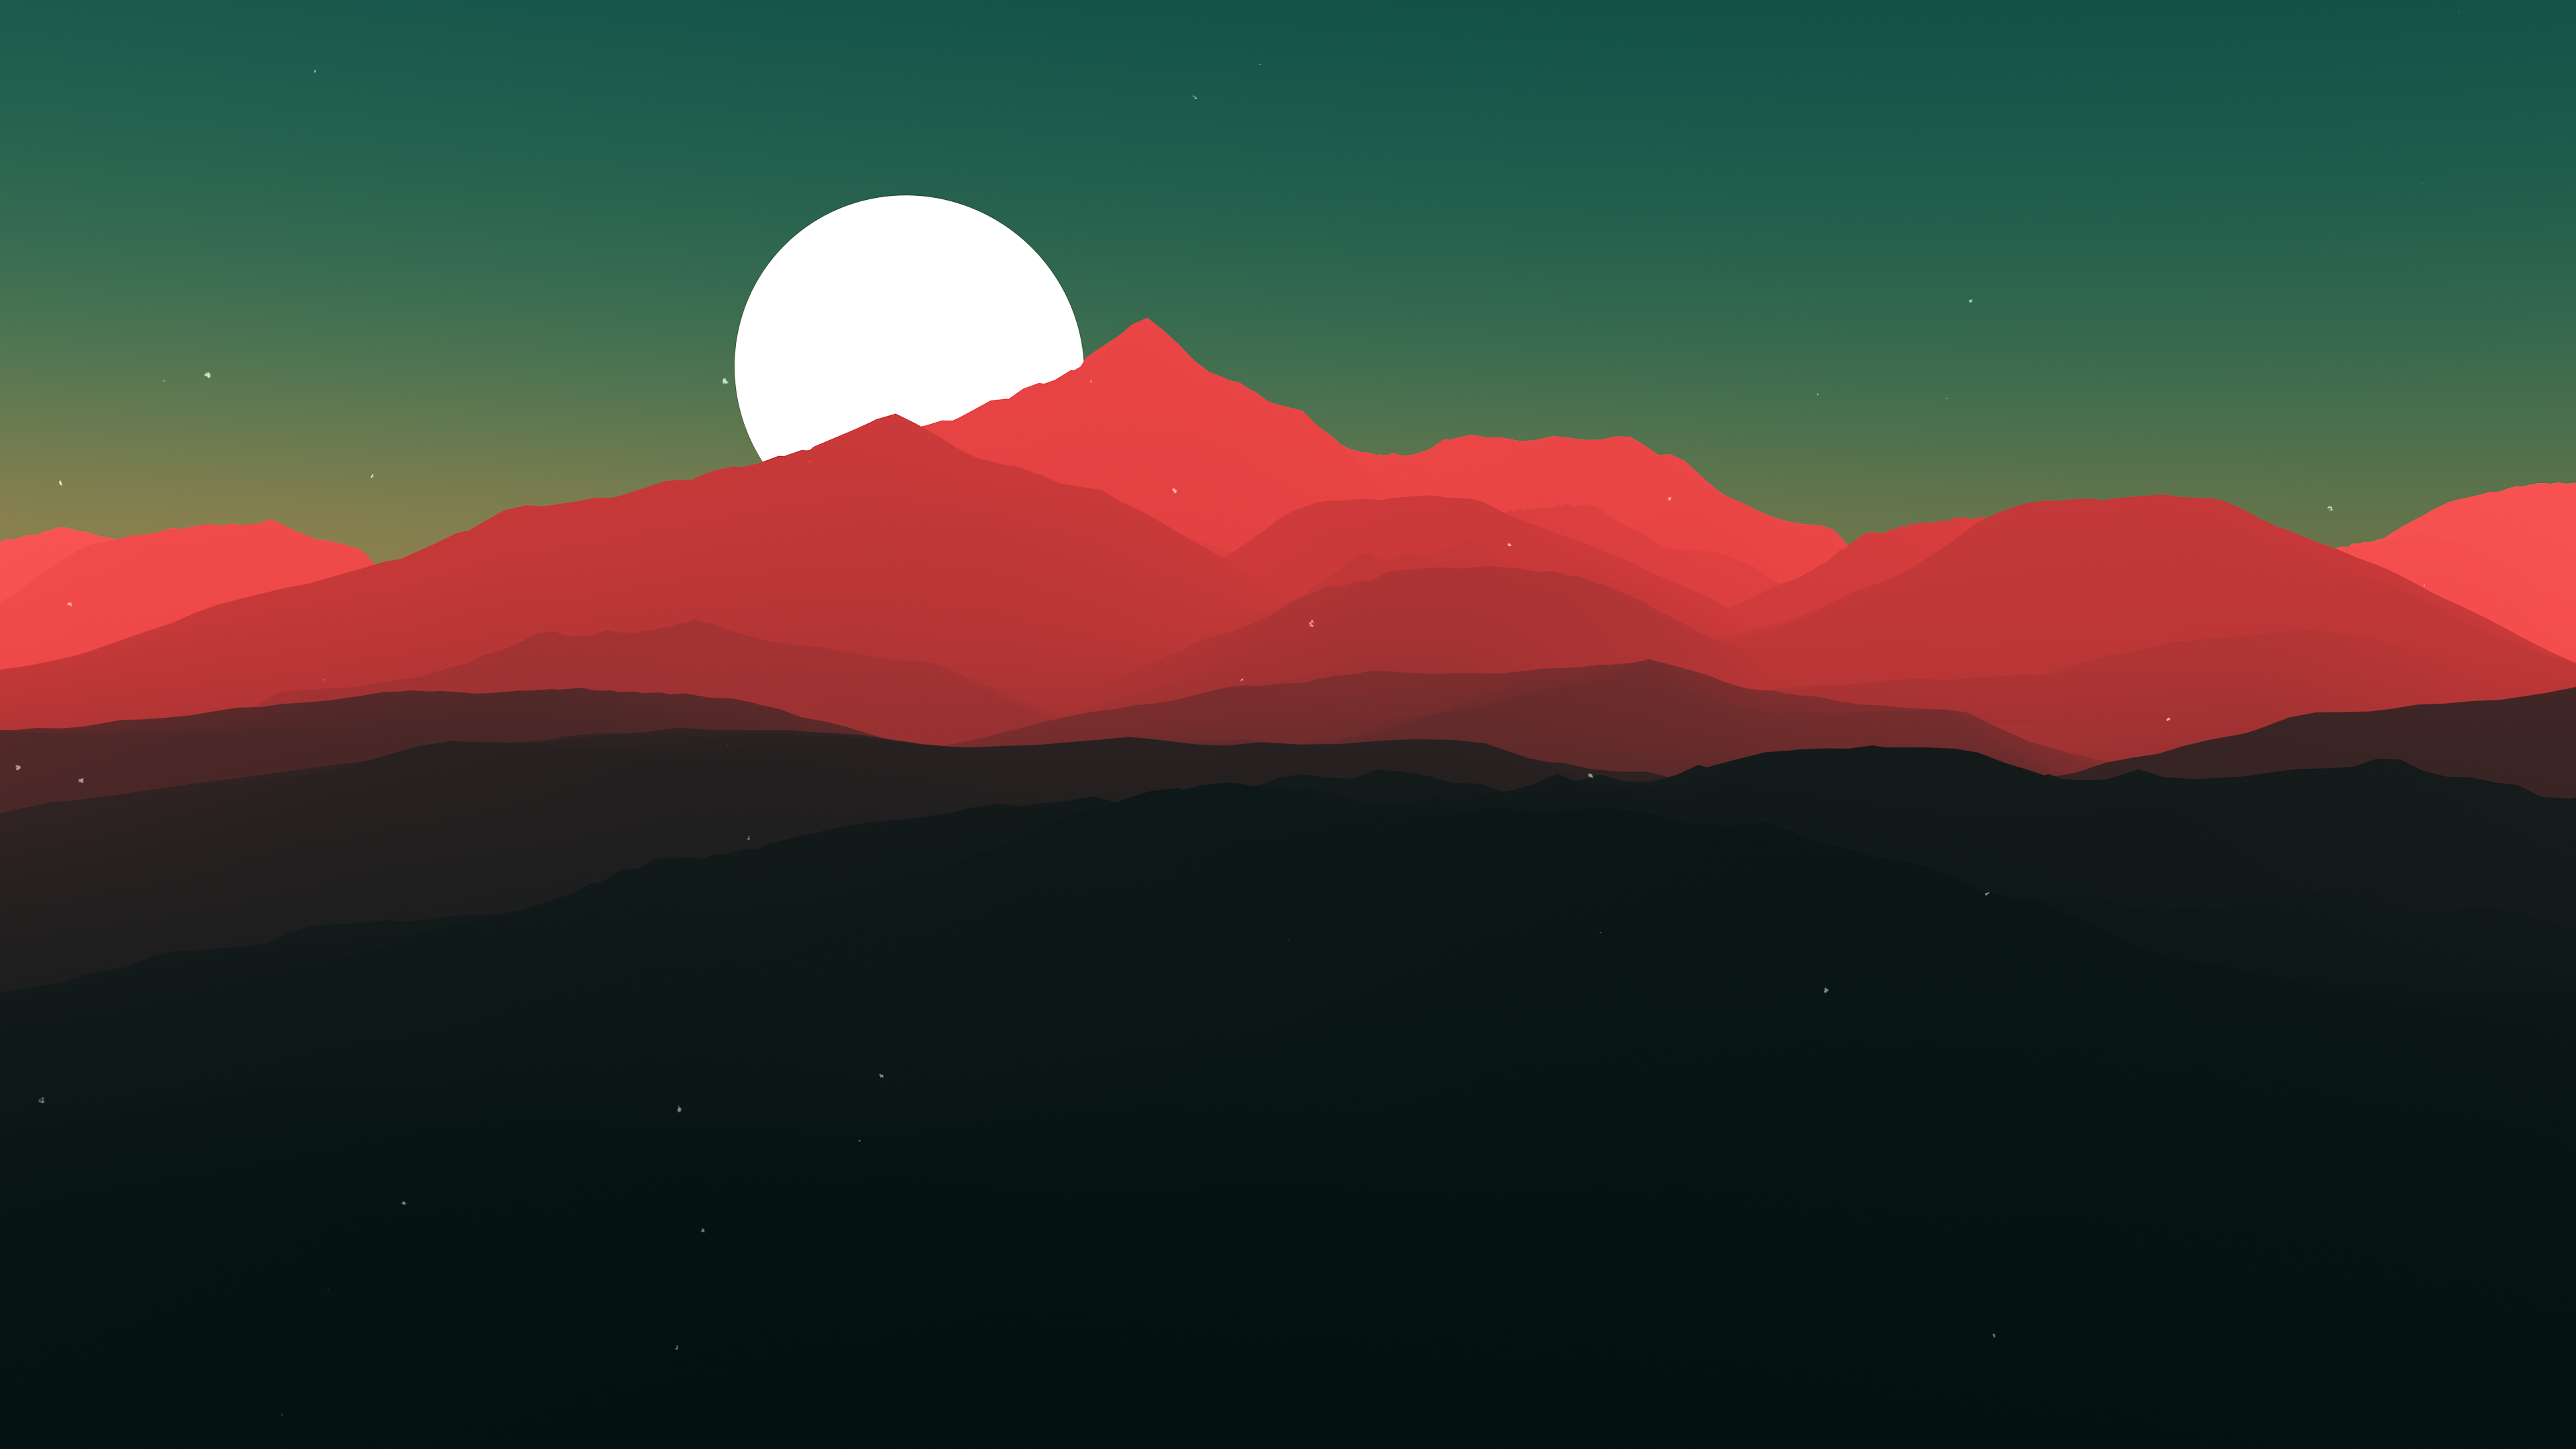 2k wallpapers for pc,mountainous landforms,sky,mountain,red,hill